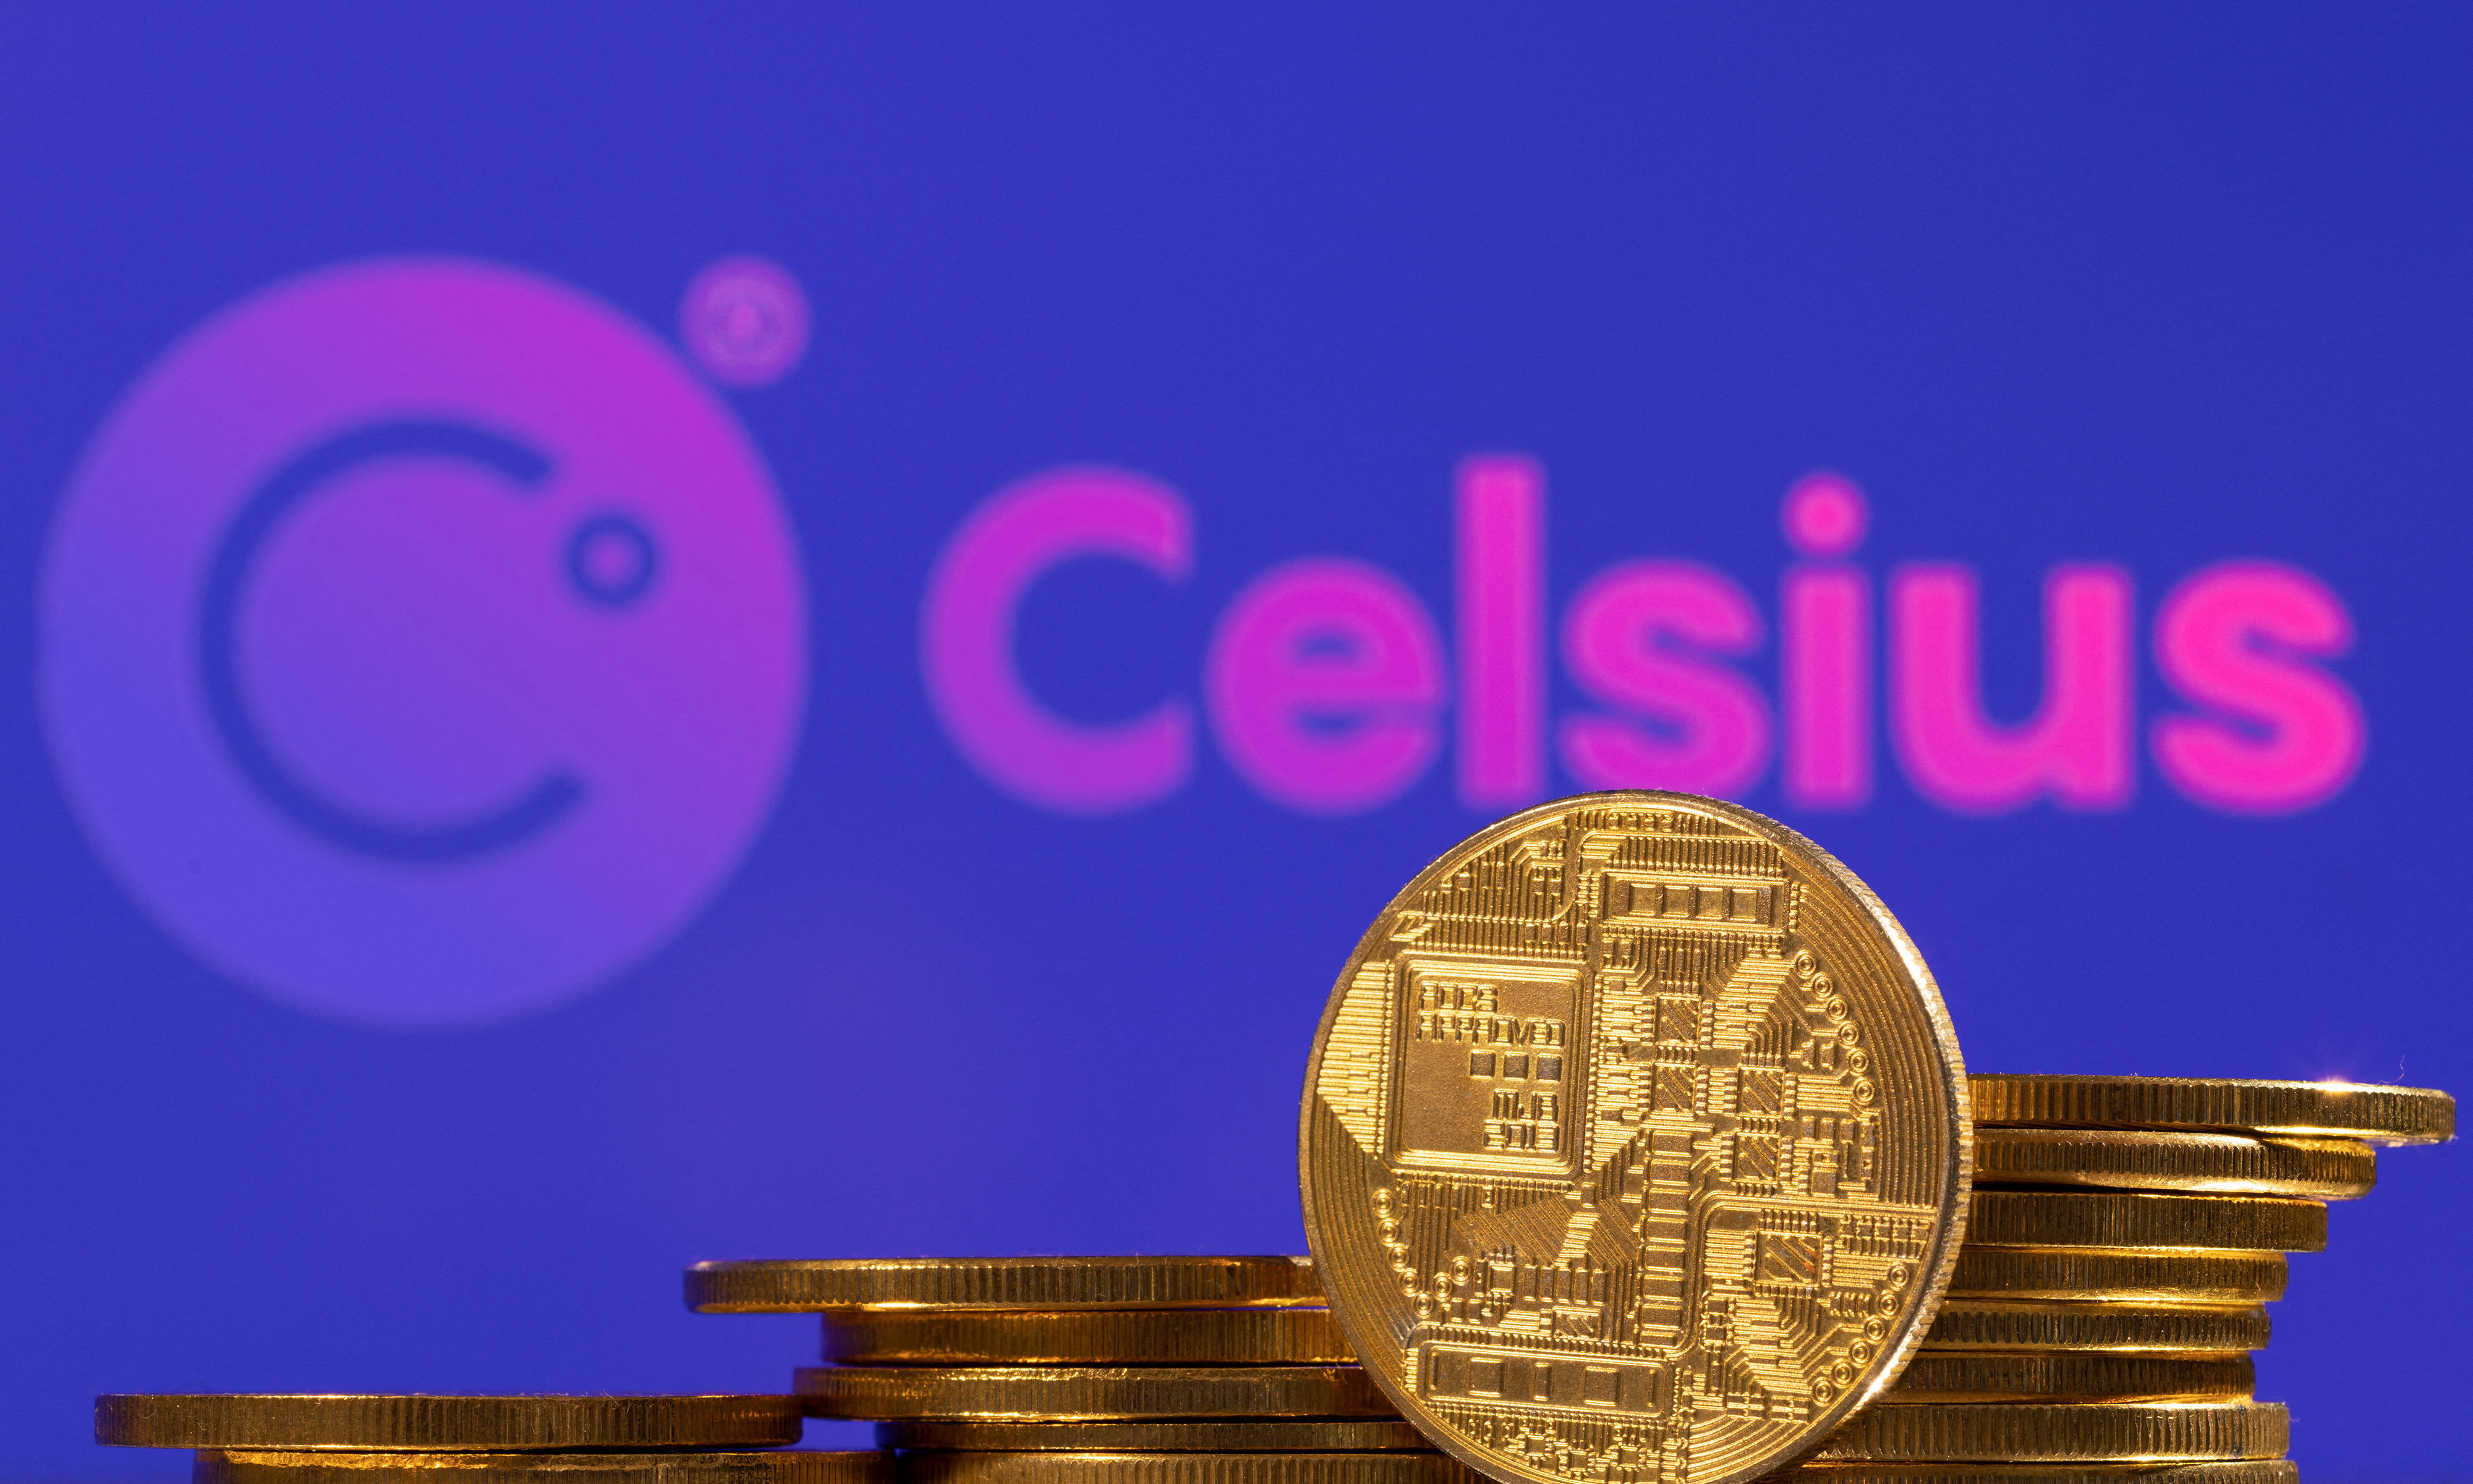 Celsius Network's native token CEL saw a 370% rally in a week, defying market selloff. The token burn, breakout, and buying in derivatives markets sparked price rally.